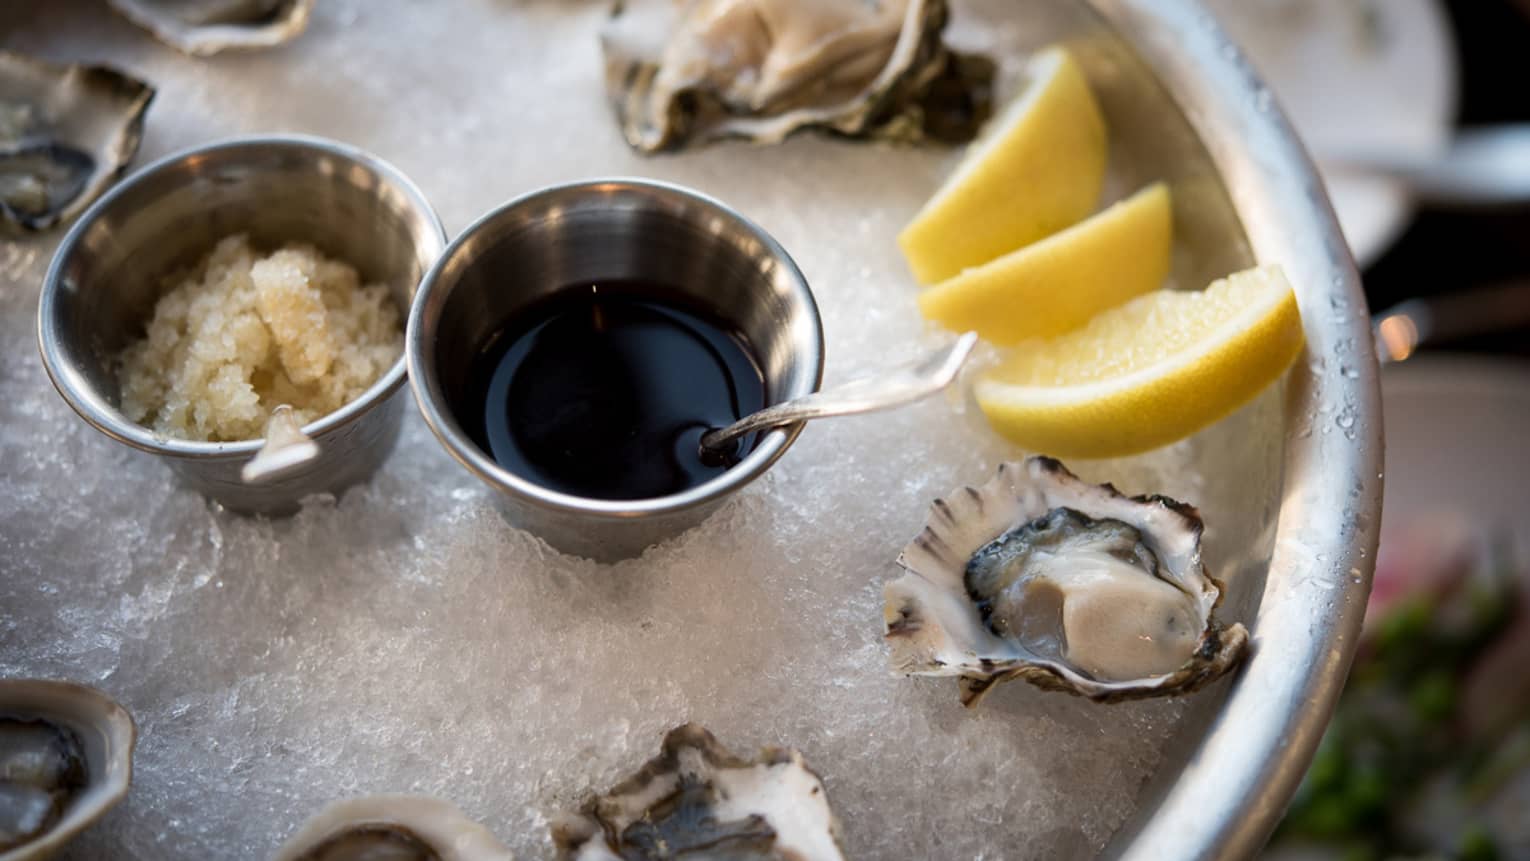 Half-shell oysters, lemon wedges on ice in silver platter